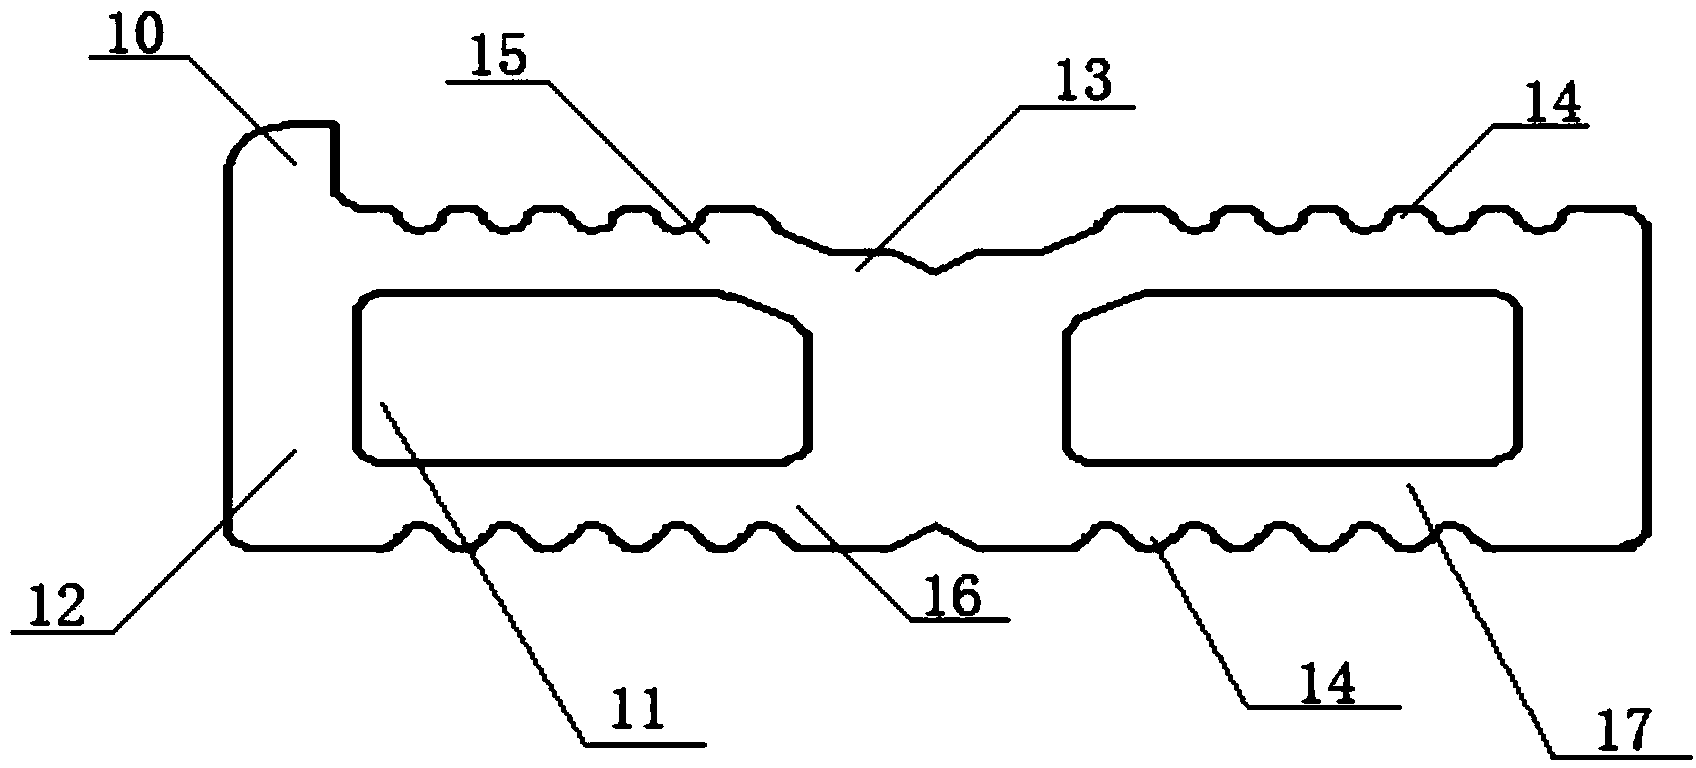 Auxiliary frame and mounting method for outer frame